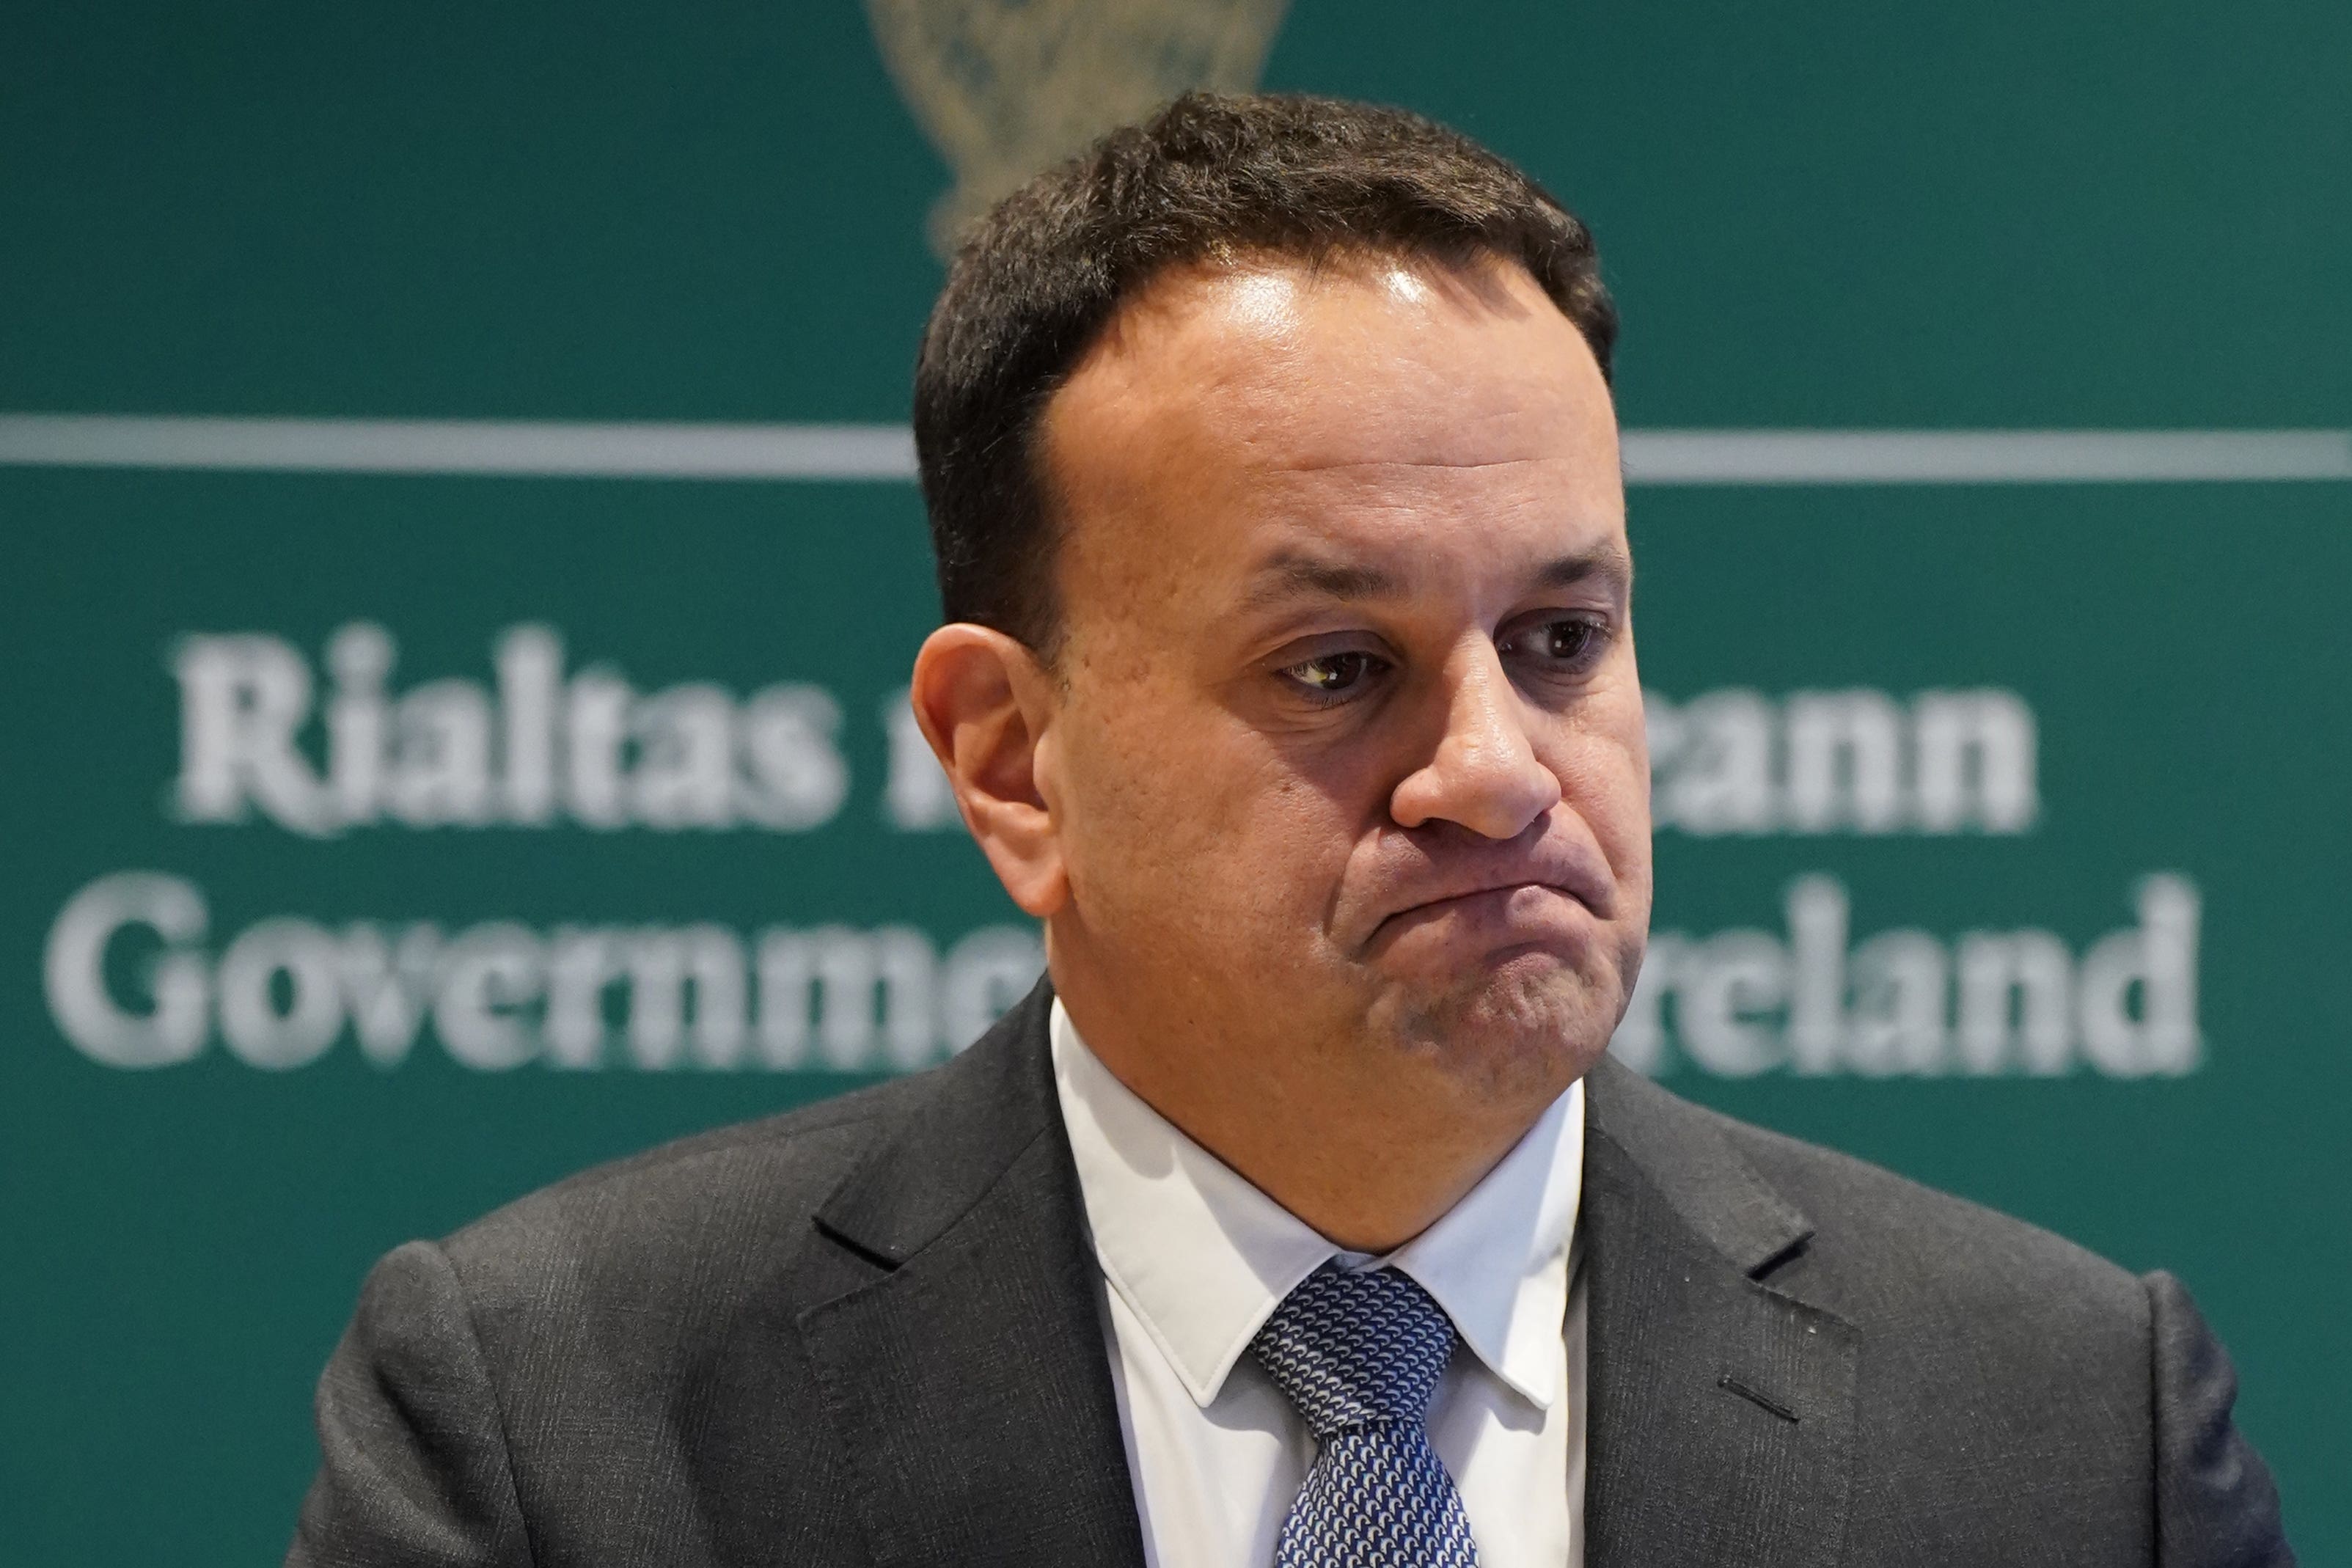 Irish premier Leo Varadkar said he hopes the decision to exclude Mary Lou McDonald from a meeting with Foreign Secretary James Cleverly is not a ‘new precedent’ (Niall Carson/PA)